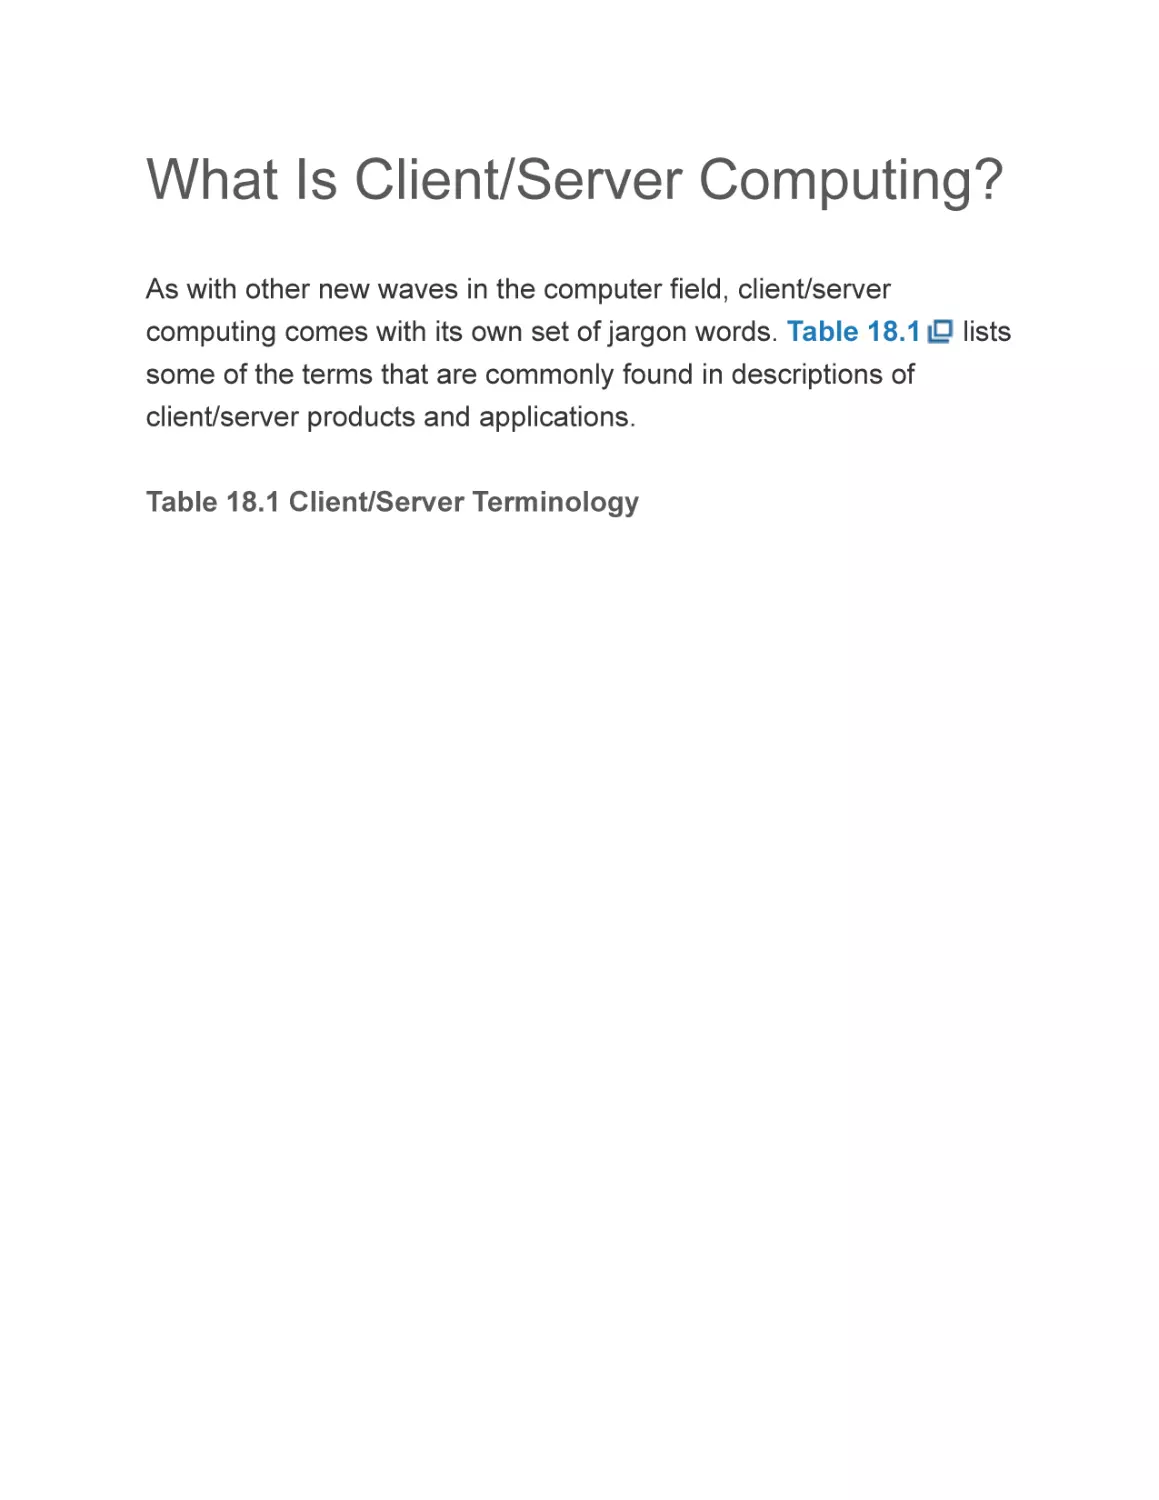 What Is Client/Server Computing?